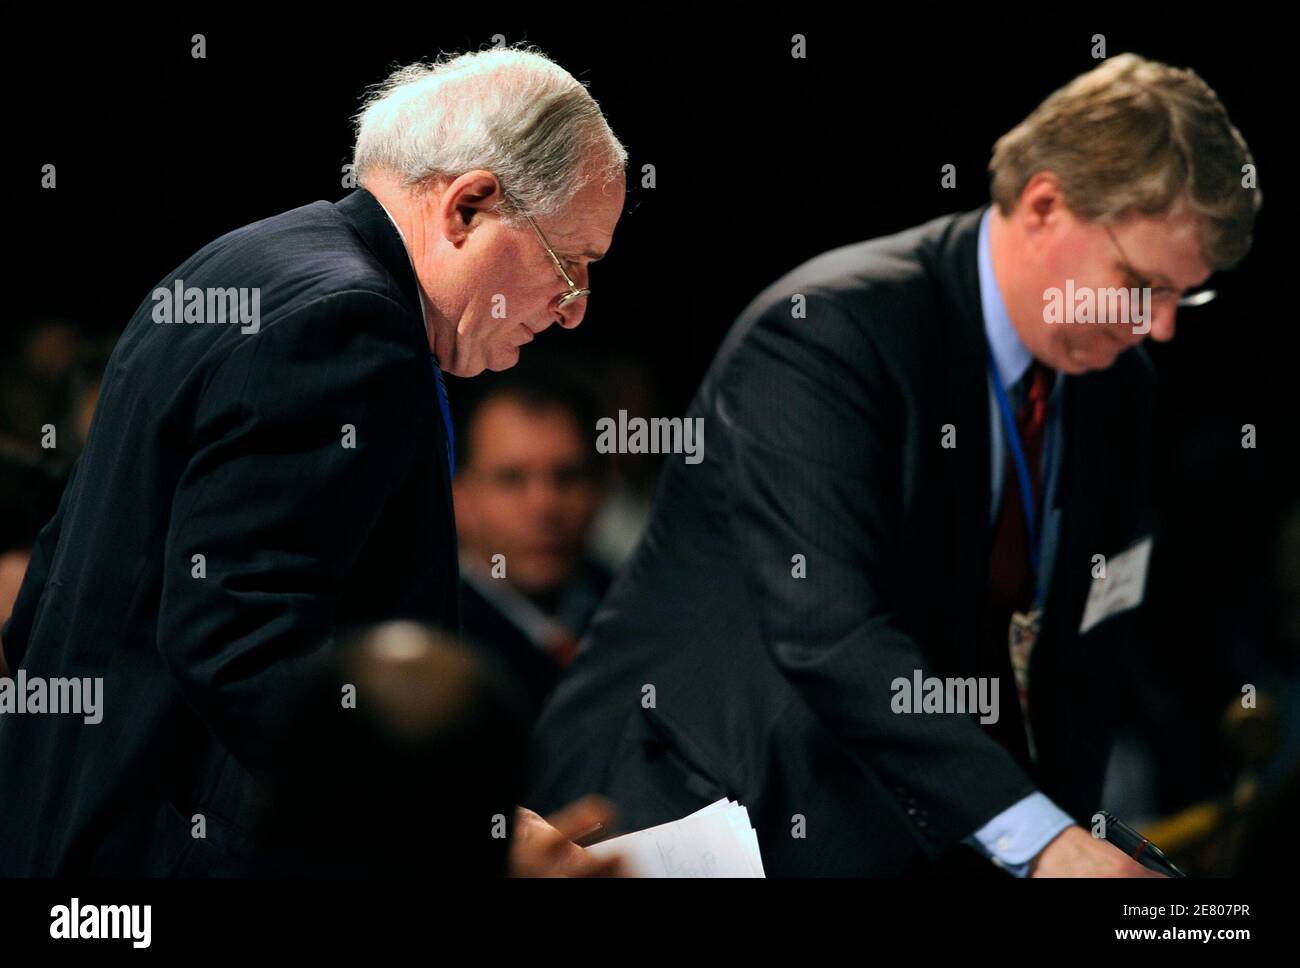 Michigan Sen. Carl Levin (L) takes his seat as Michigan Democratic Party Chairman Mark Brewer departs at the Democratic National Committee Rules and Bylaws Committee meeting in Washington May 31, 2008. The Democratic Party will search for a compromise over disputed convention delegates from Florida and Michigan on Saturday in what could be Hillary Clinton's last chance to gain ground on presidential rival Barack Obama REUTERS/Mike Theiler (UNITED STATES) US PRESIDENTIAL  ELECTION CAMPAIGN 2008 (USA) Stock Photo